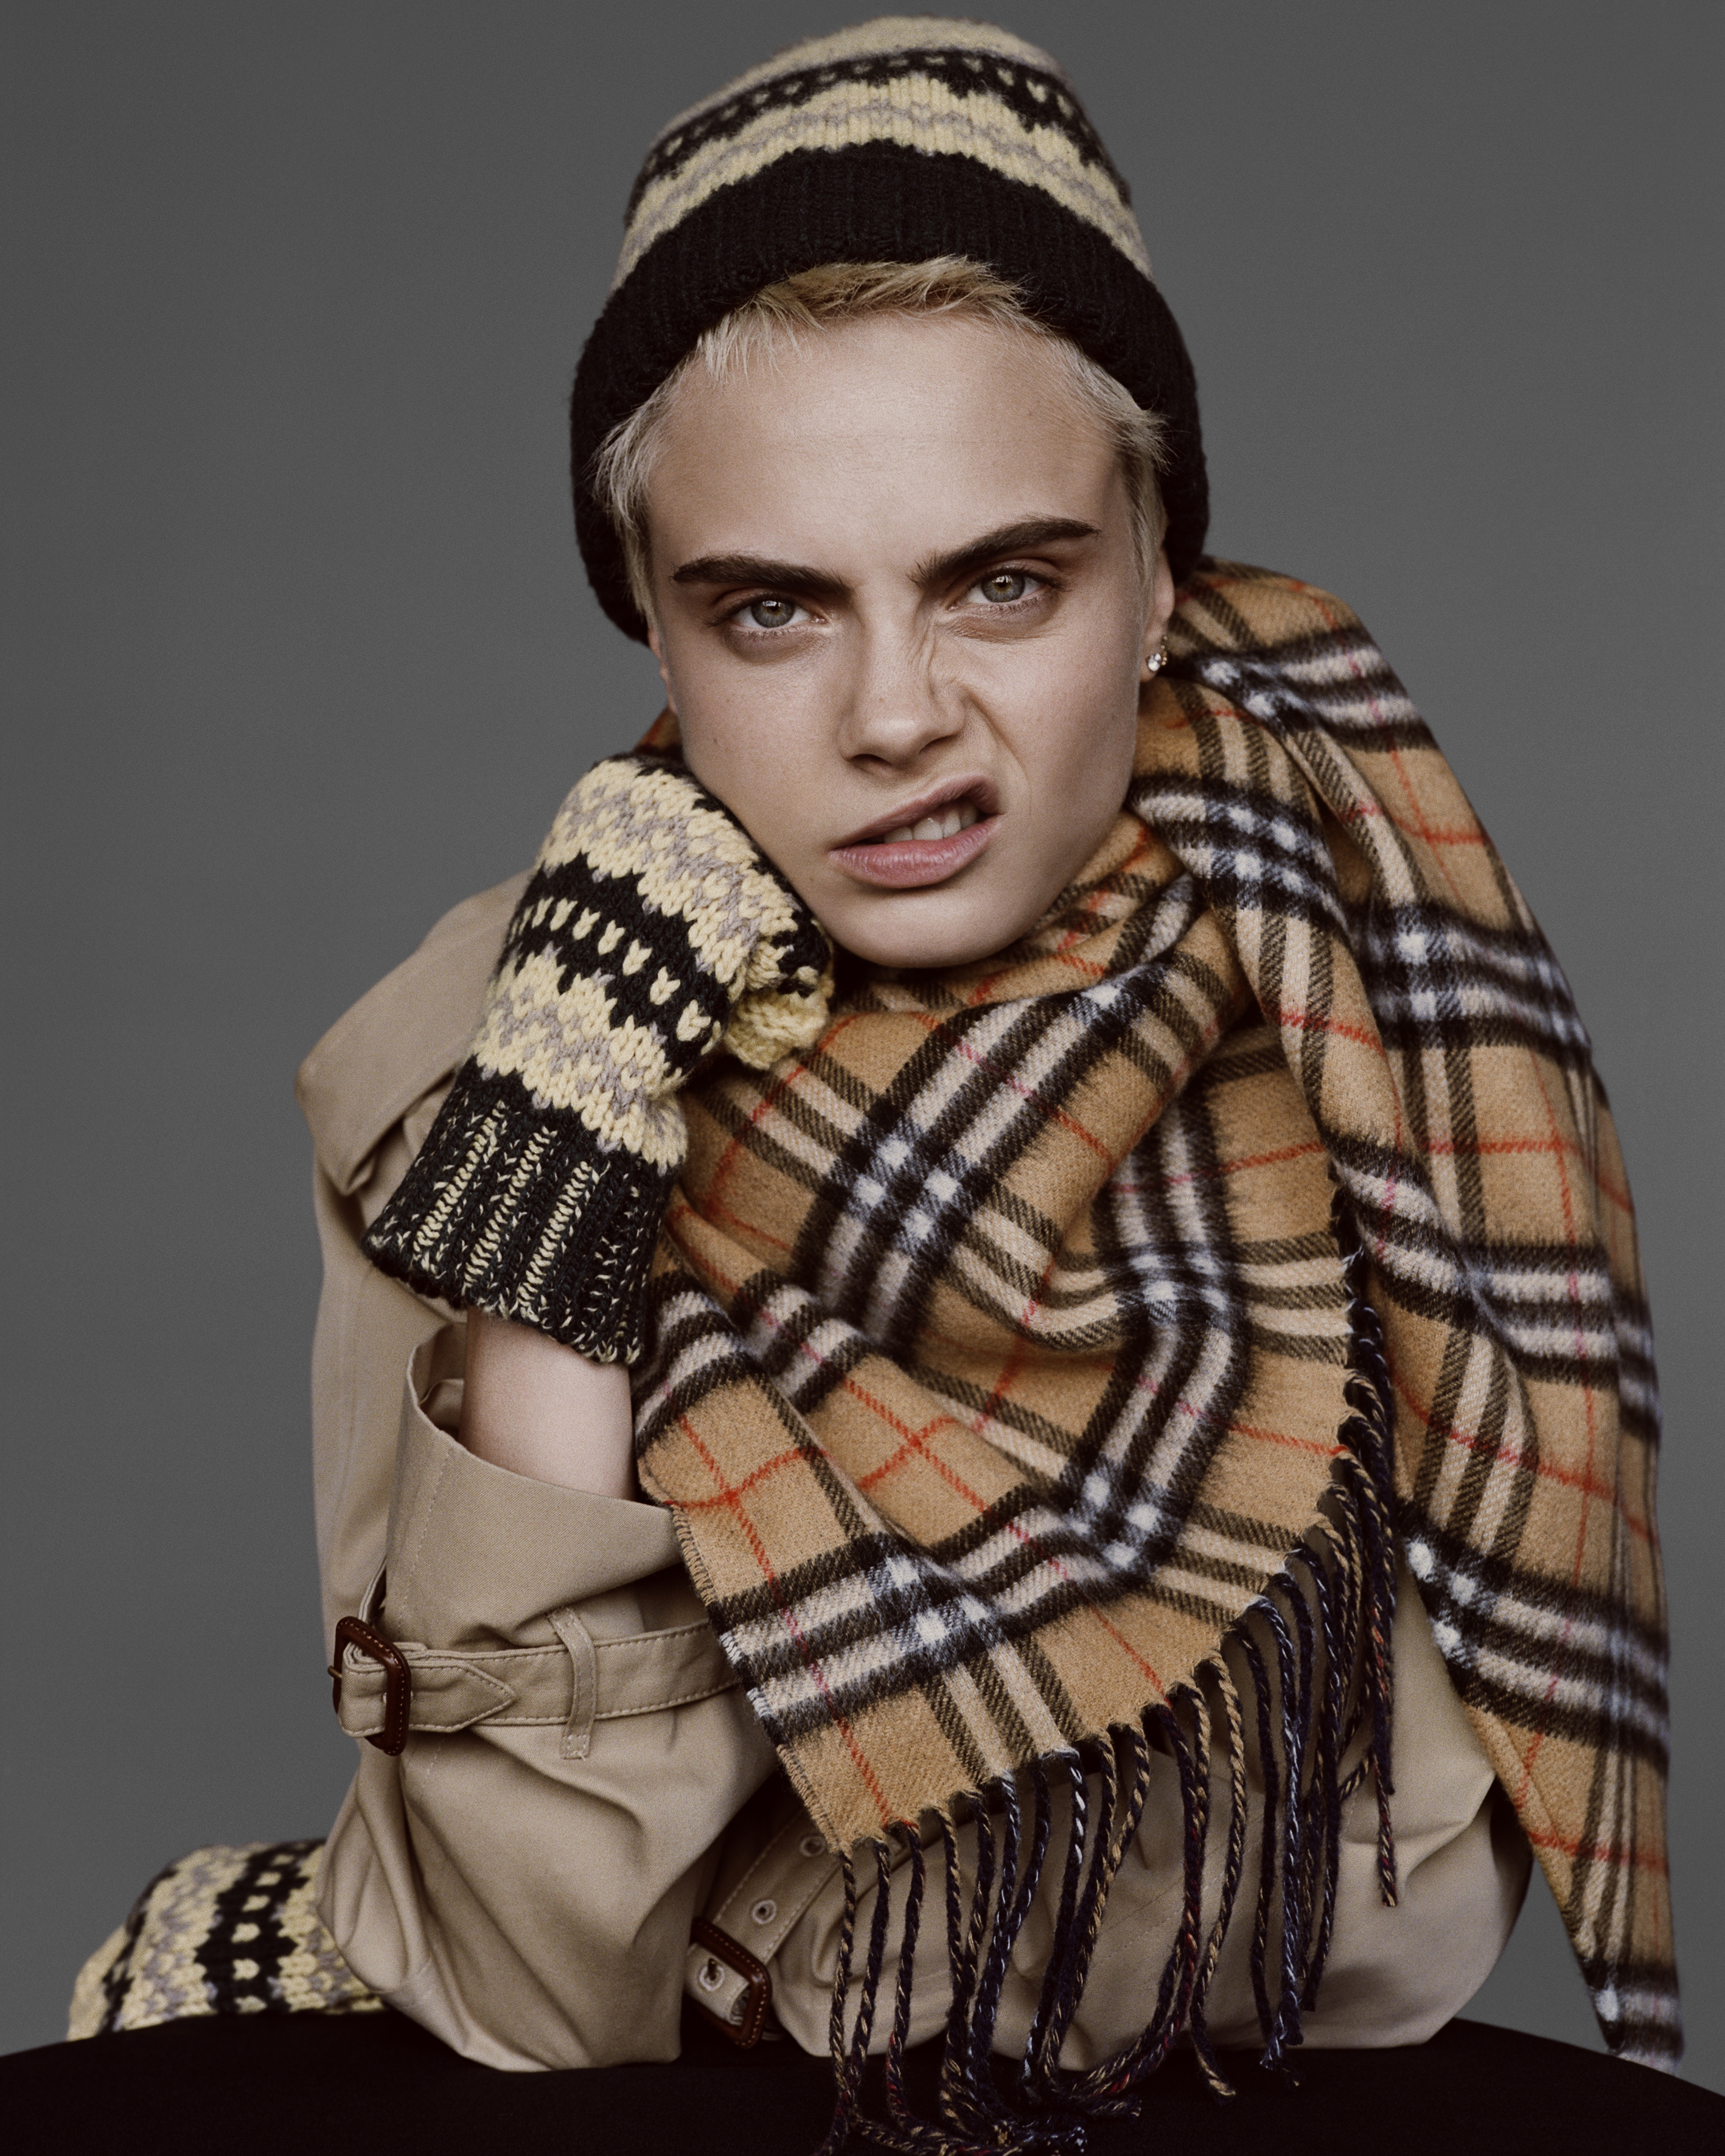 cara-delevingne-captured-for-burberry-by-alasdair-mclellan-c-courtesy-of-burberry-_-alasdair-mclellan_001